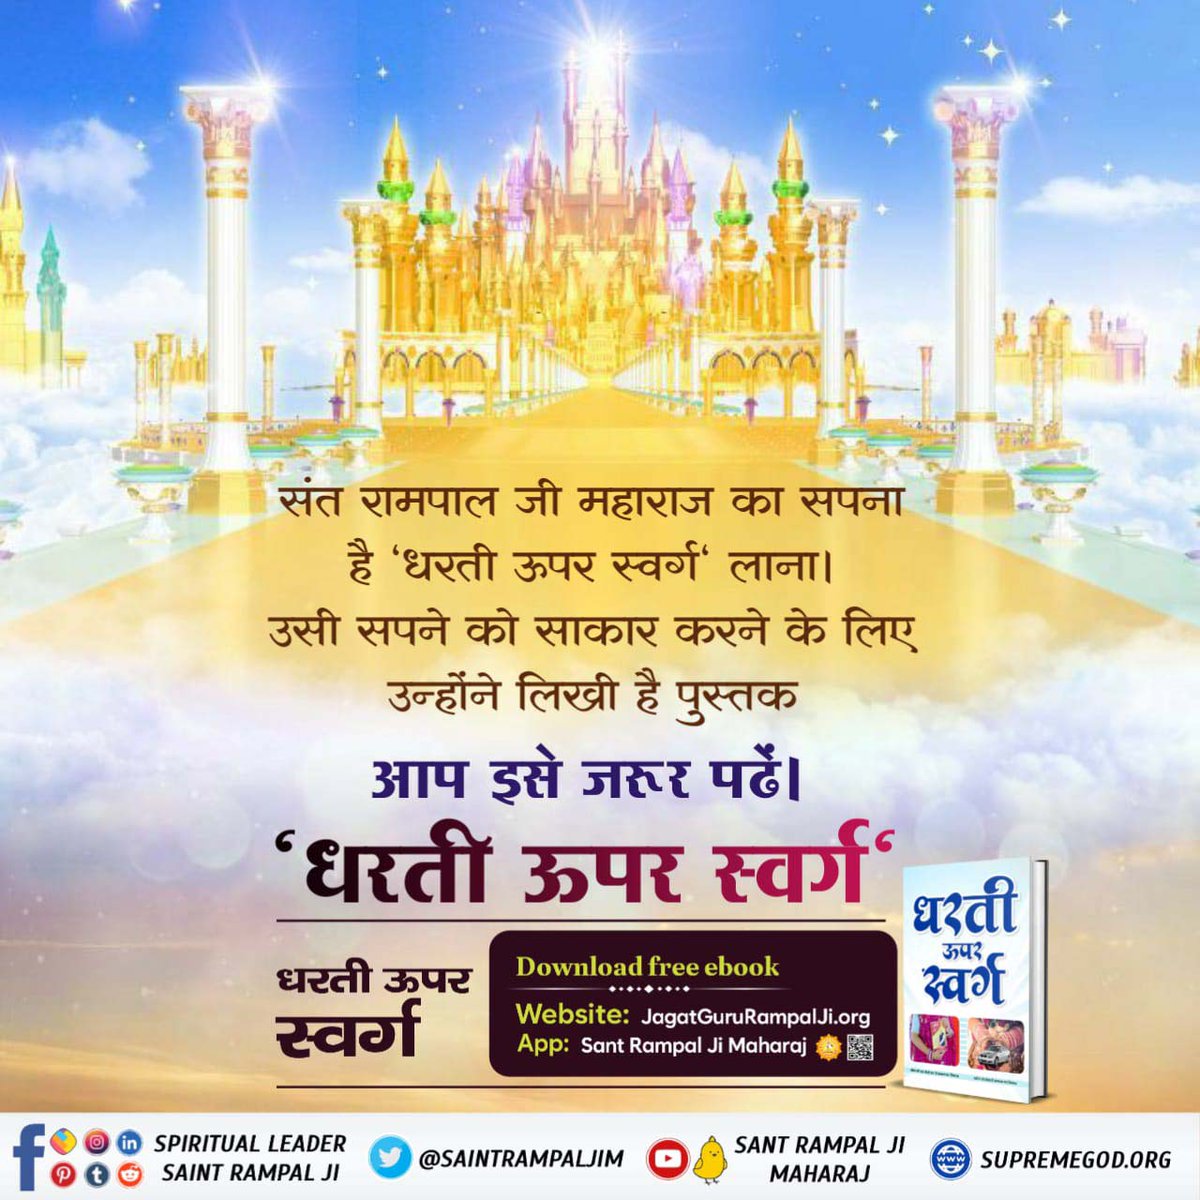 #धरती_को_स्वर्ग_बनाना_है
IN HIS BOOK DHARTI UPAR SWARG,Sant Rampal Ji Maharaj
has explained that by consuming the medicine of true spiritual knowledge provided by a complete saint, society can easily put an end to prevalent vices and addictions, thus transforming the E